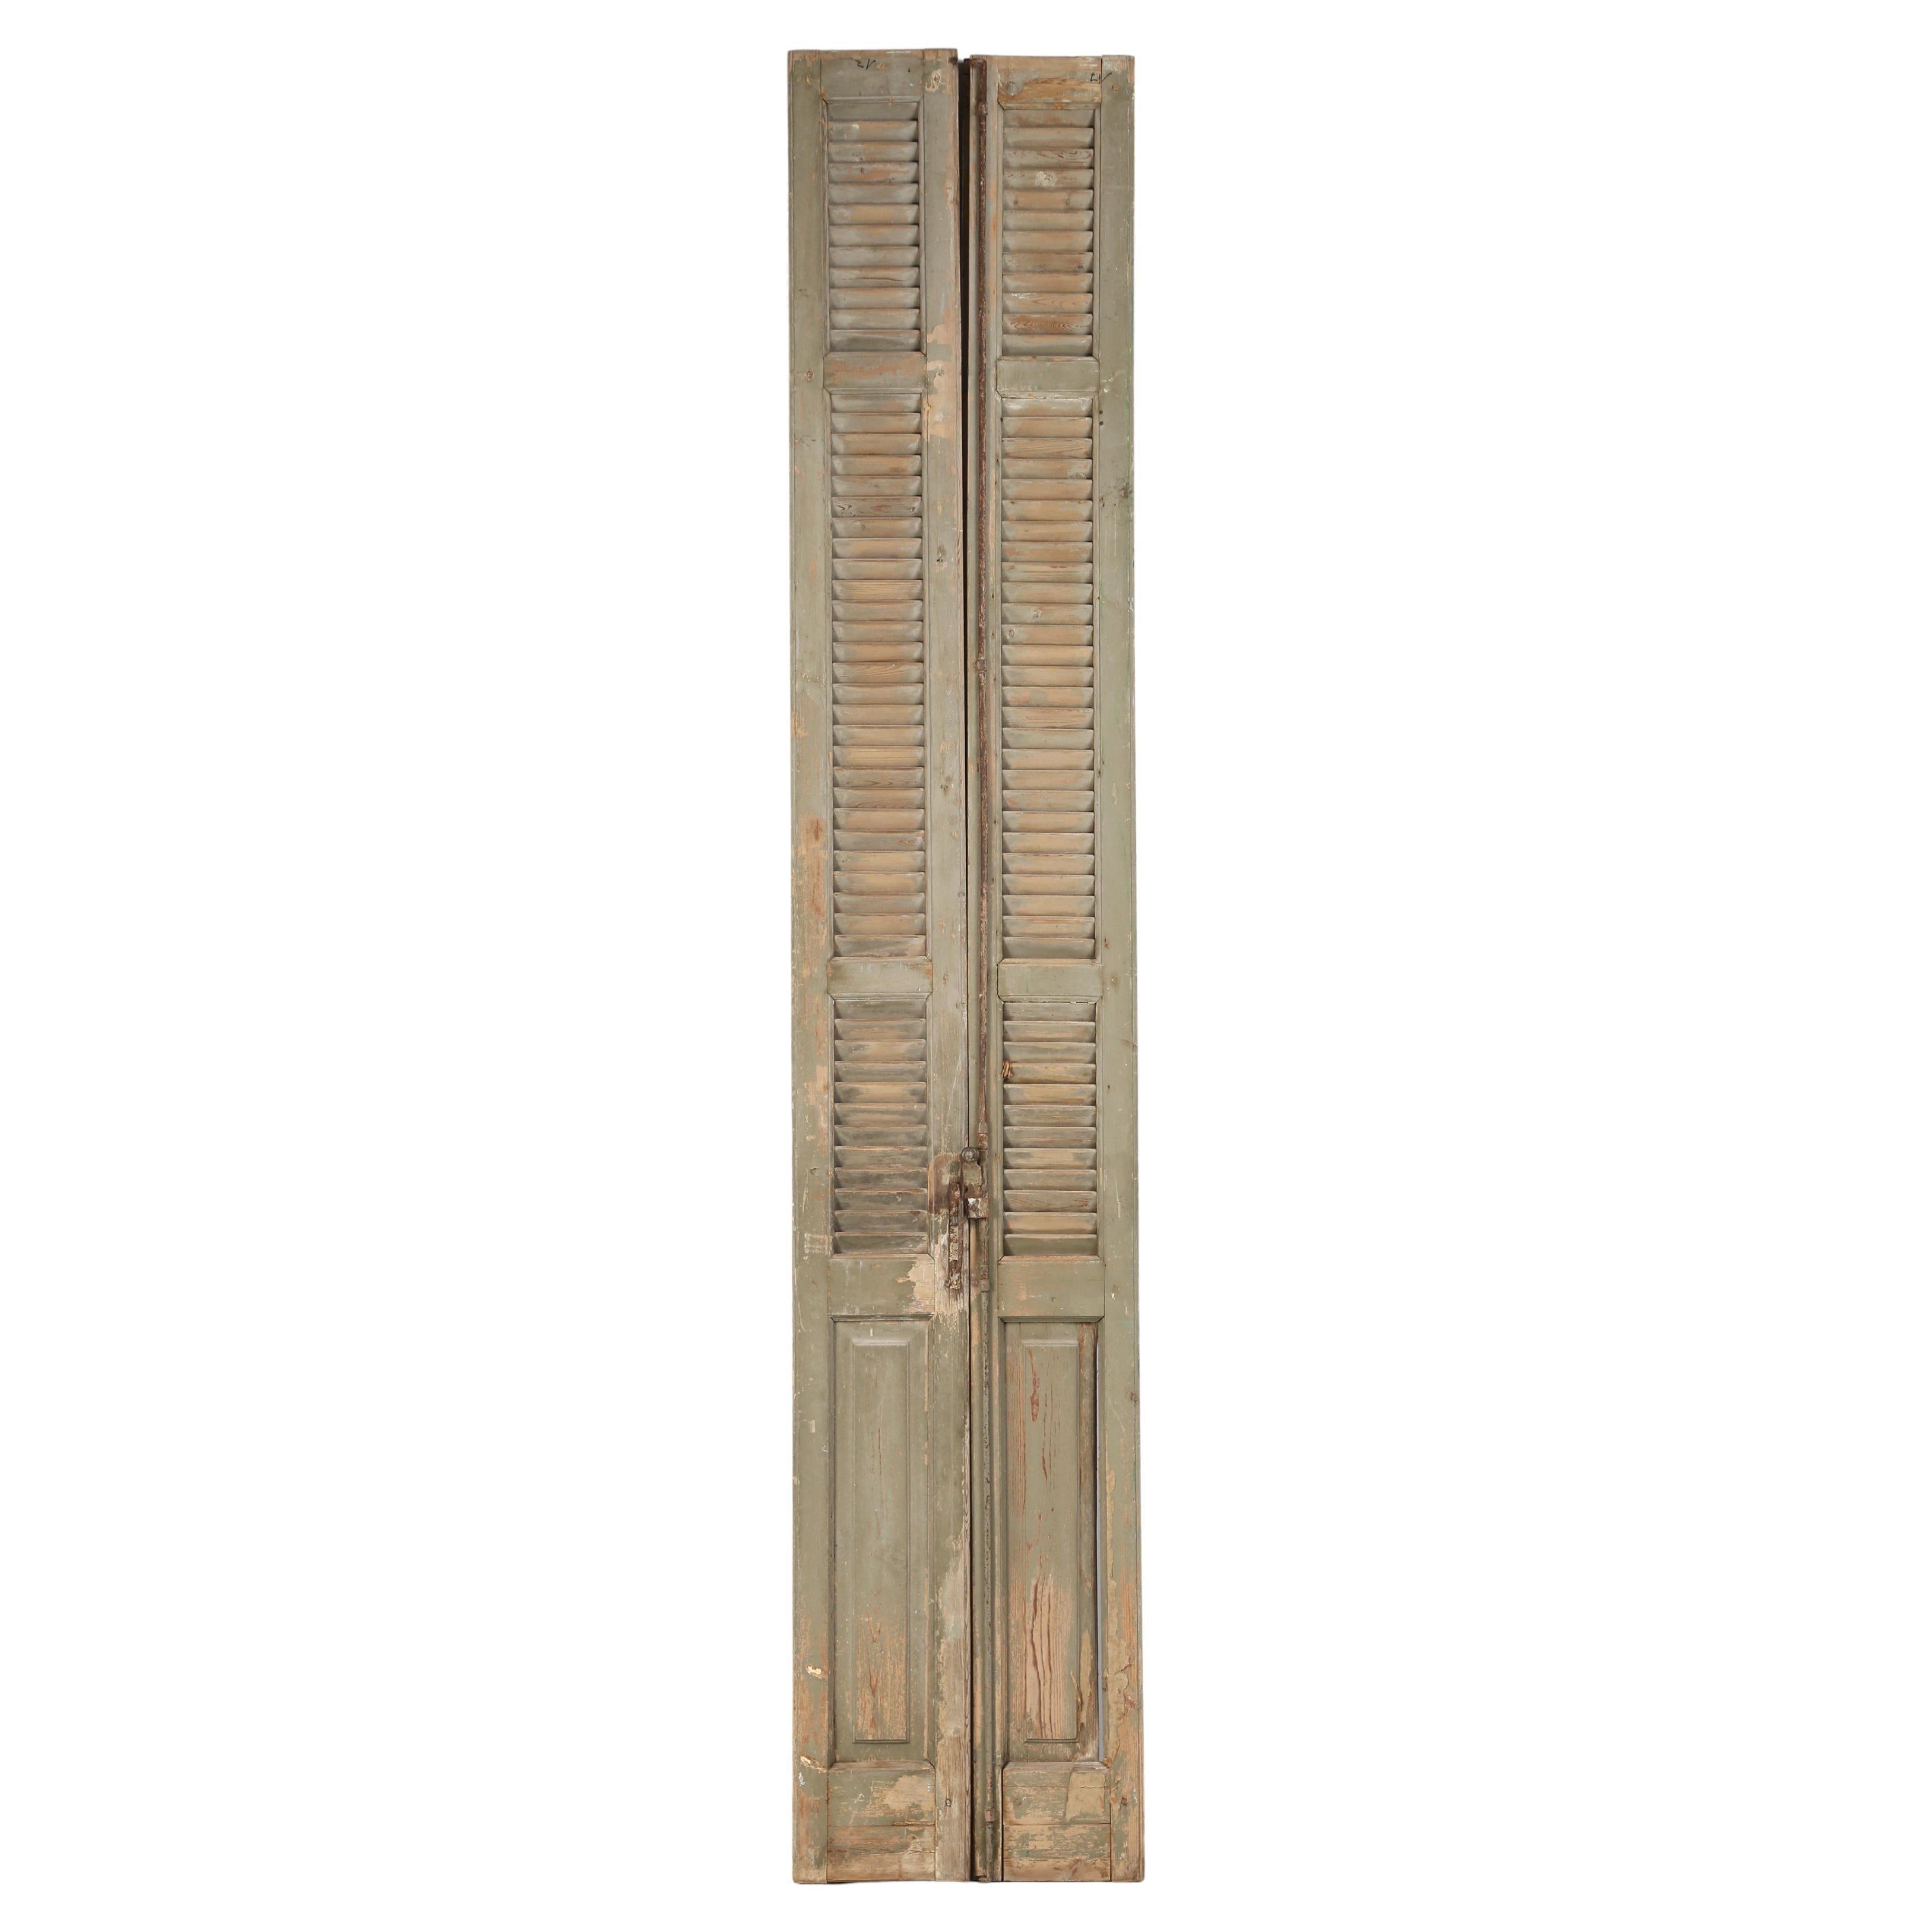 Pair of Antique French Shutter in Old Crumbly Paint From a Chateau in Brittany